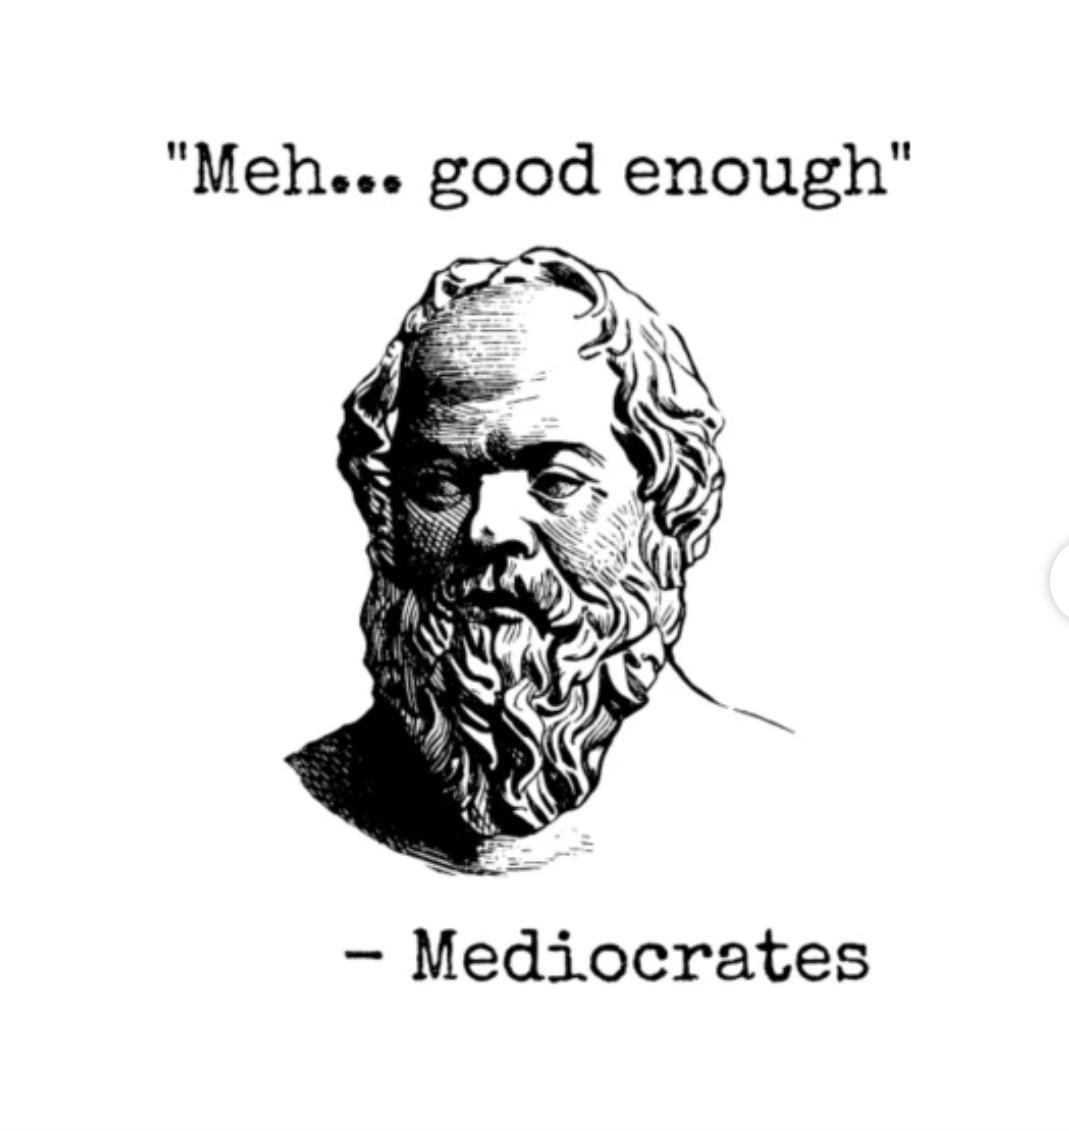 The little known Greek philosopher who still influences us